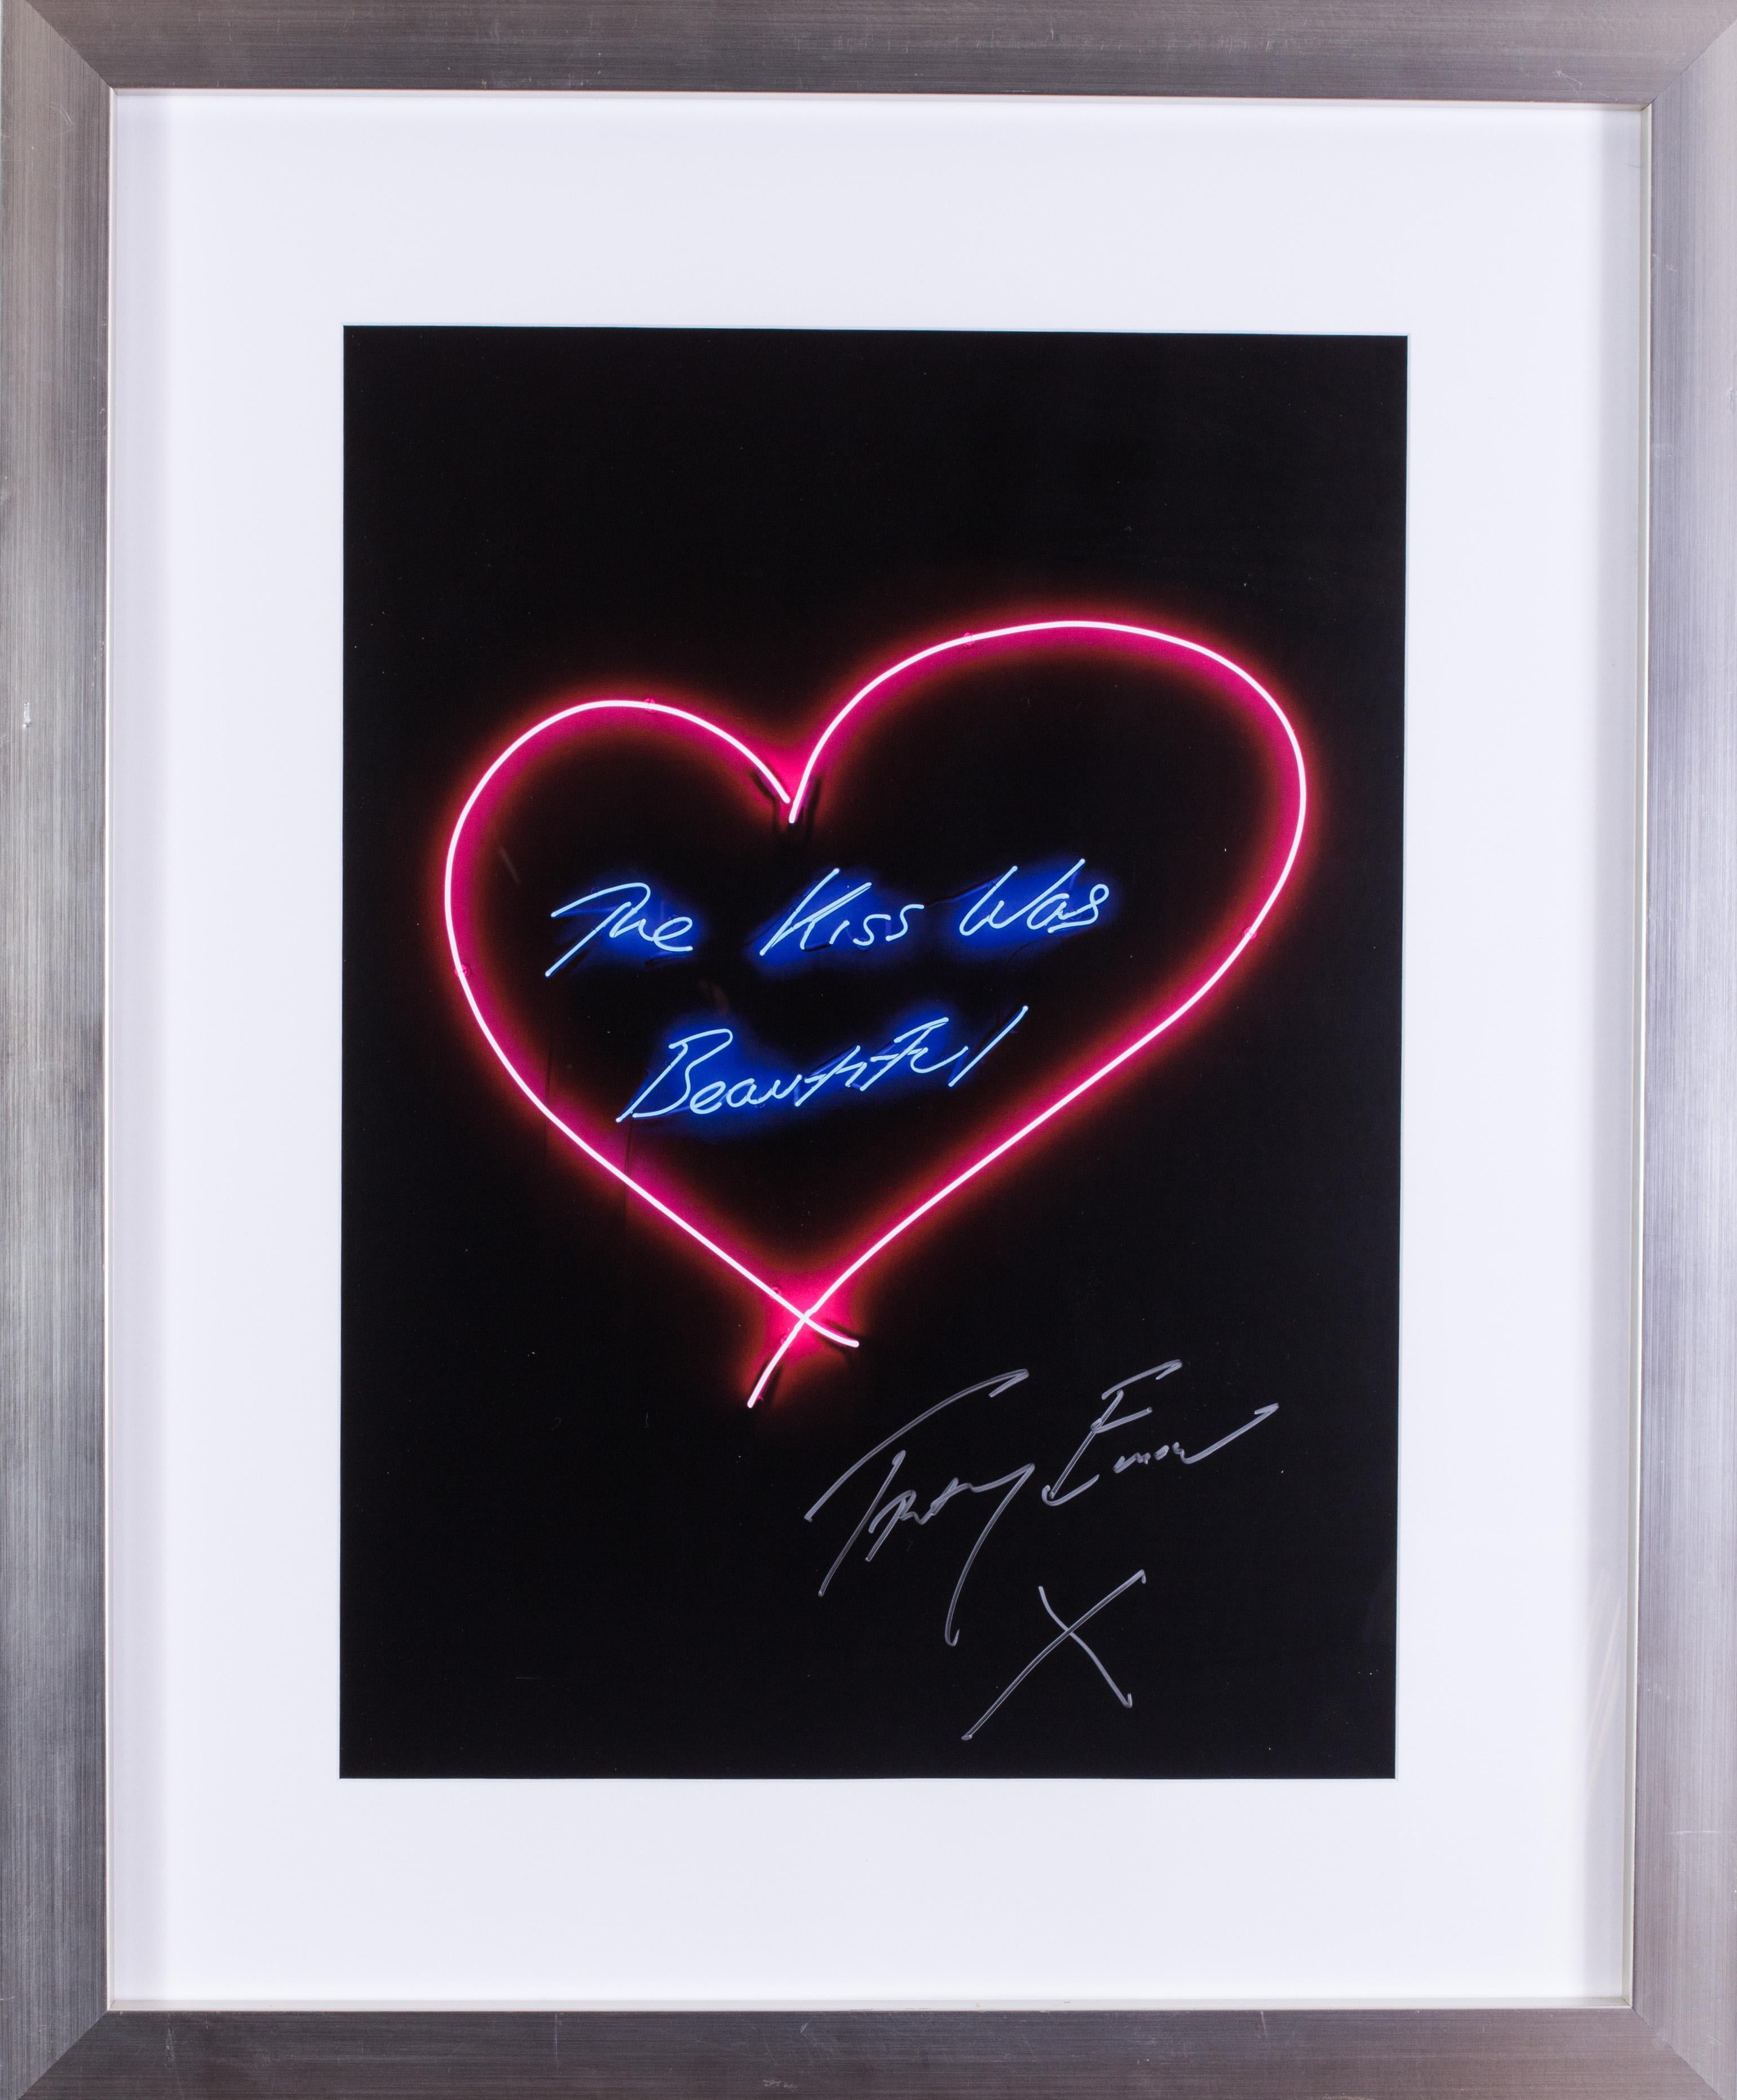 The Kiss was beautiful - Young British Artists (YBA) Print by Tracey Emin